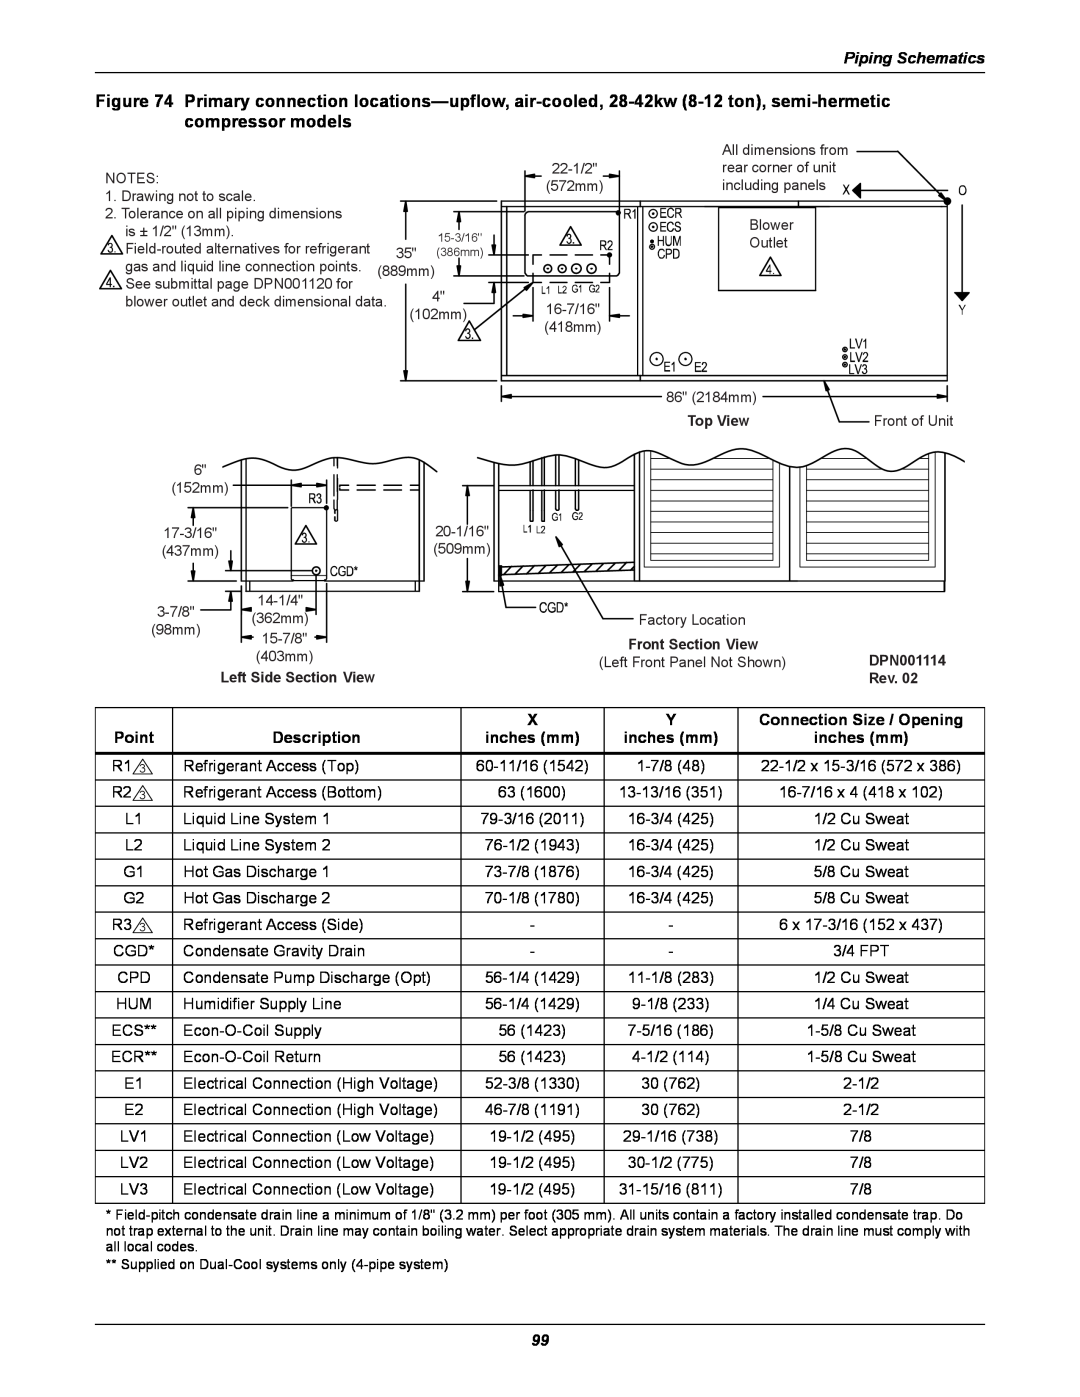 Liebert DS user manual Piping Schematics, Connection Size / Opening, Point, Description, inches mm 